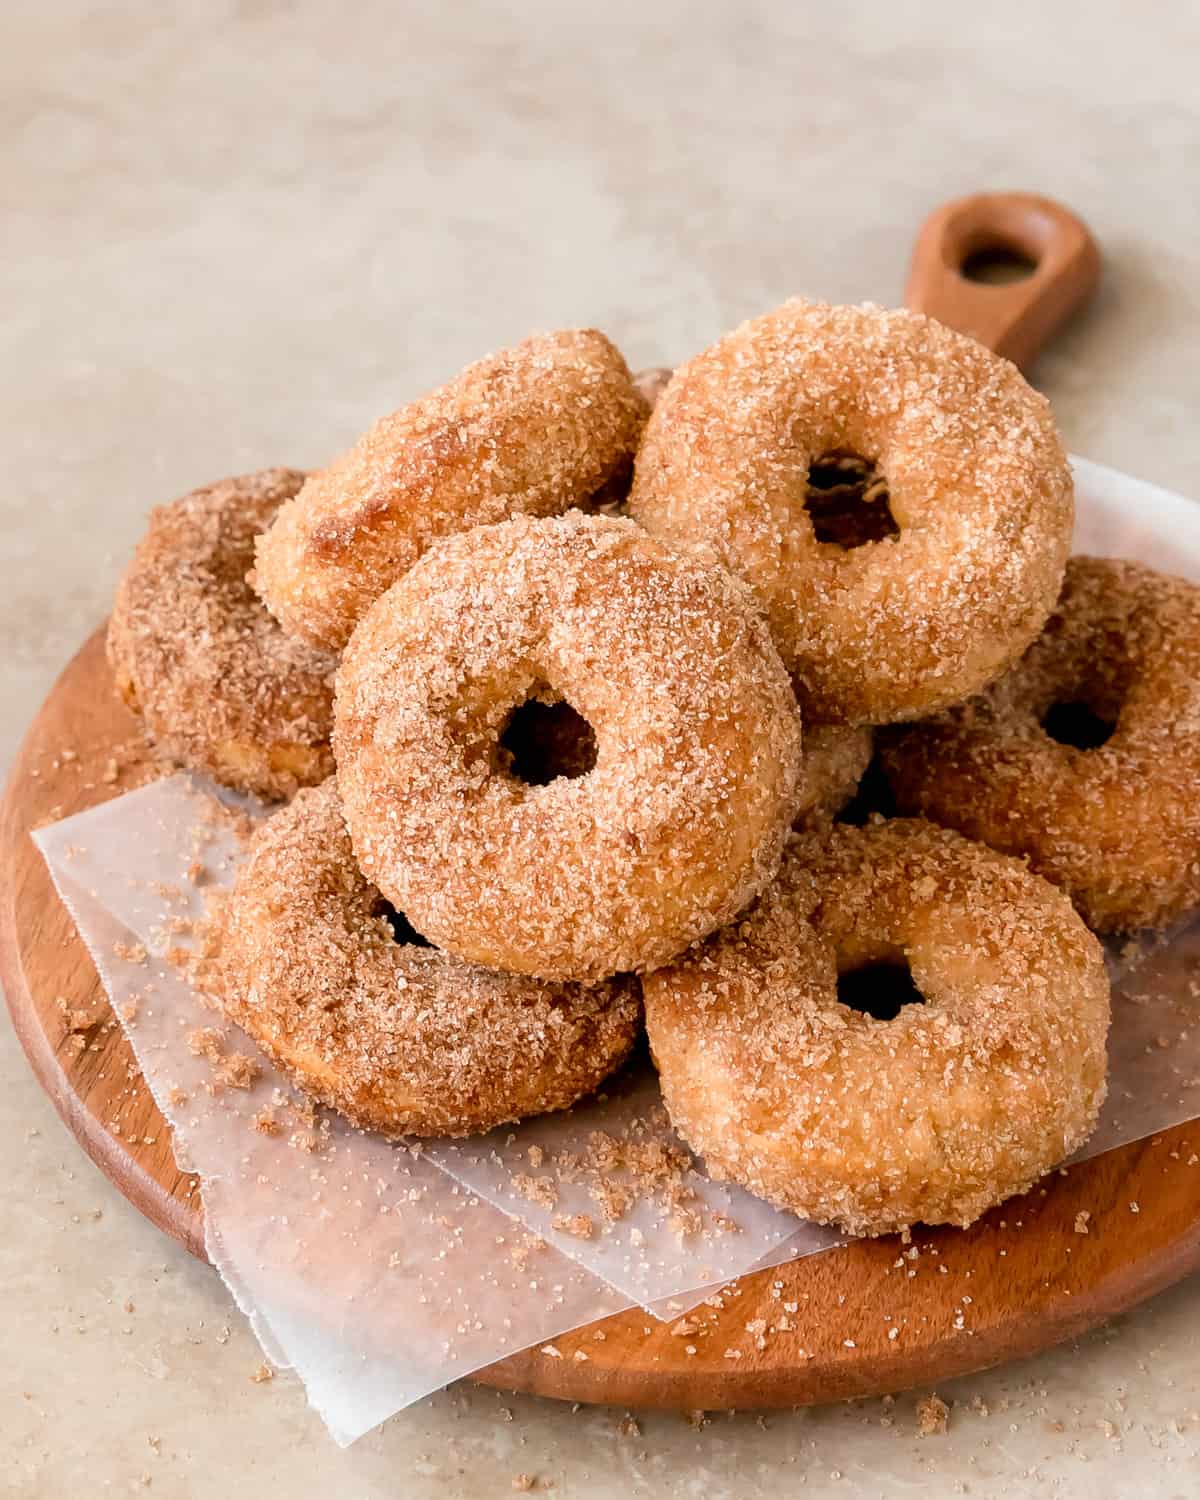 Baked donuts coated in cinnamon sugar on a serving plate